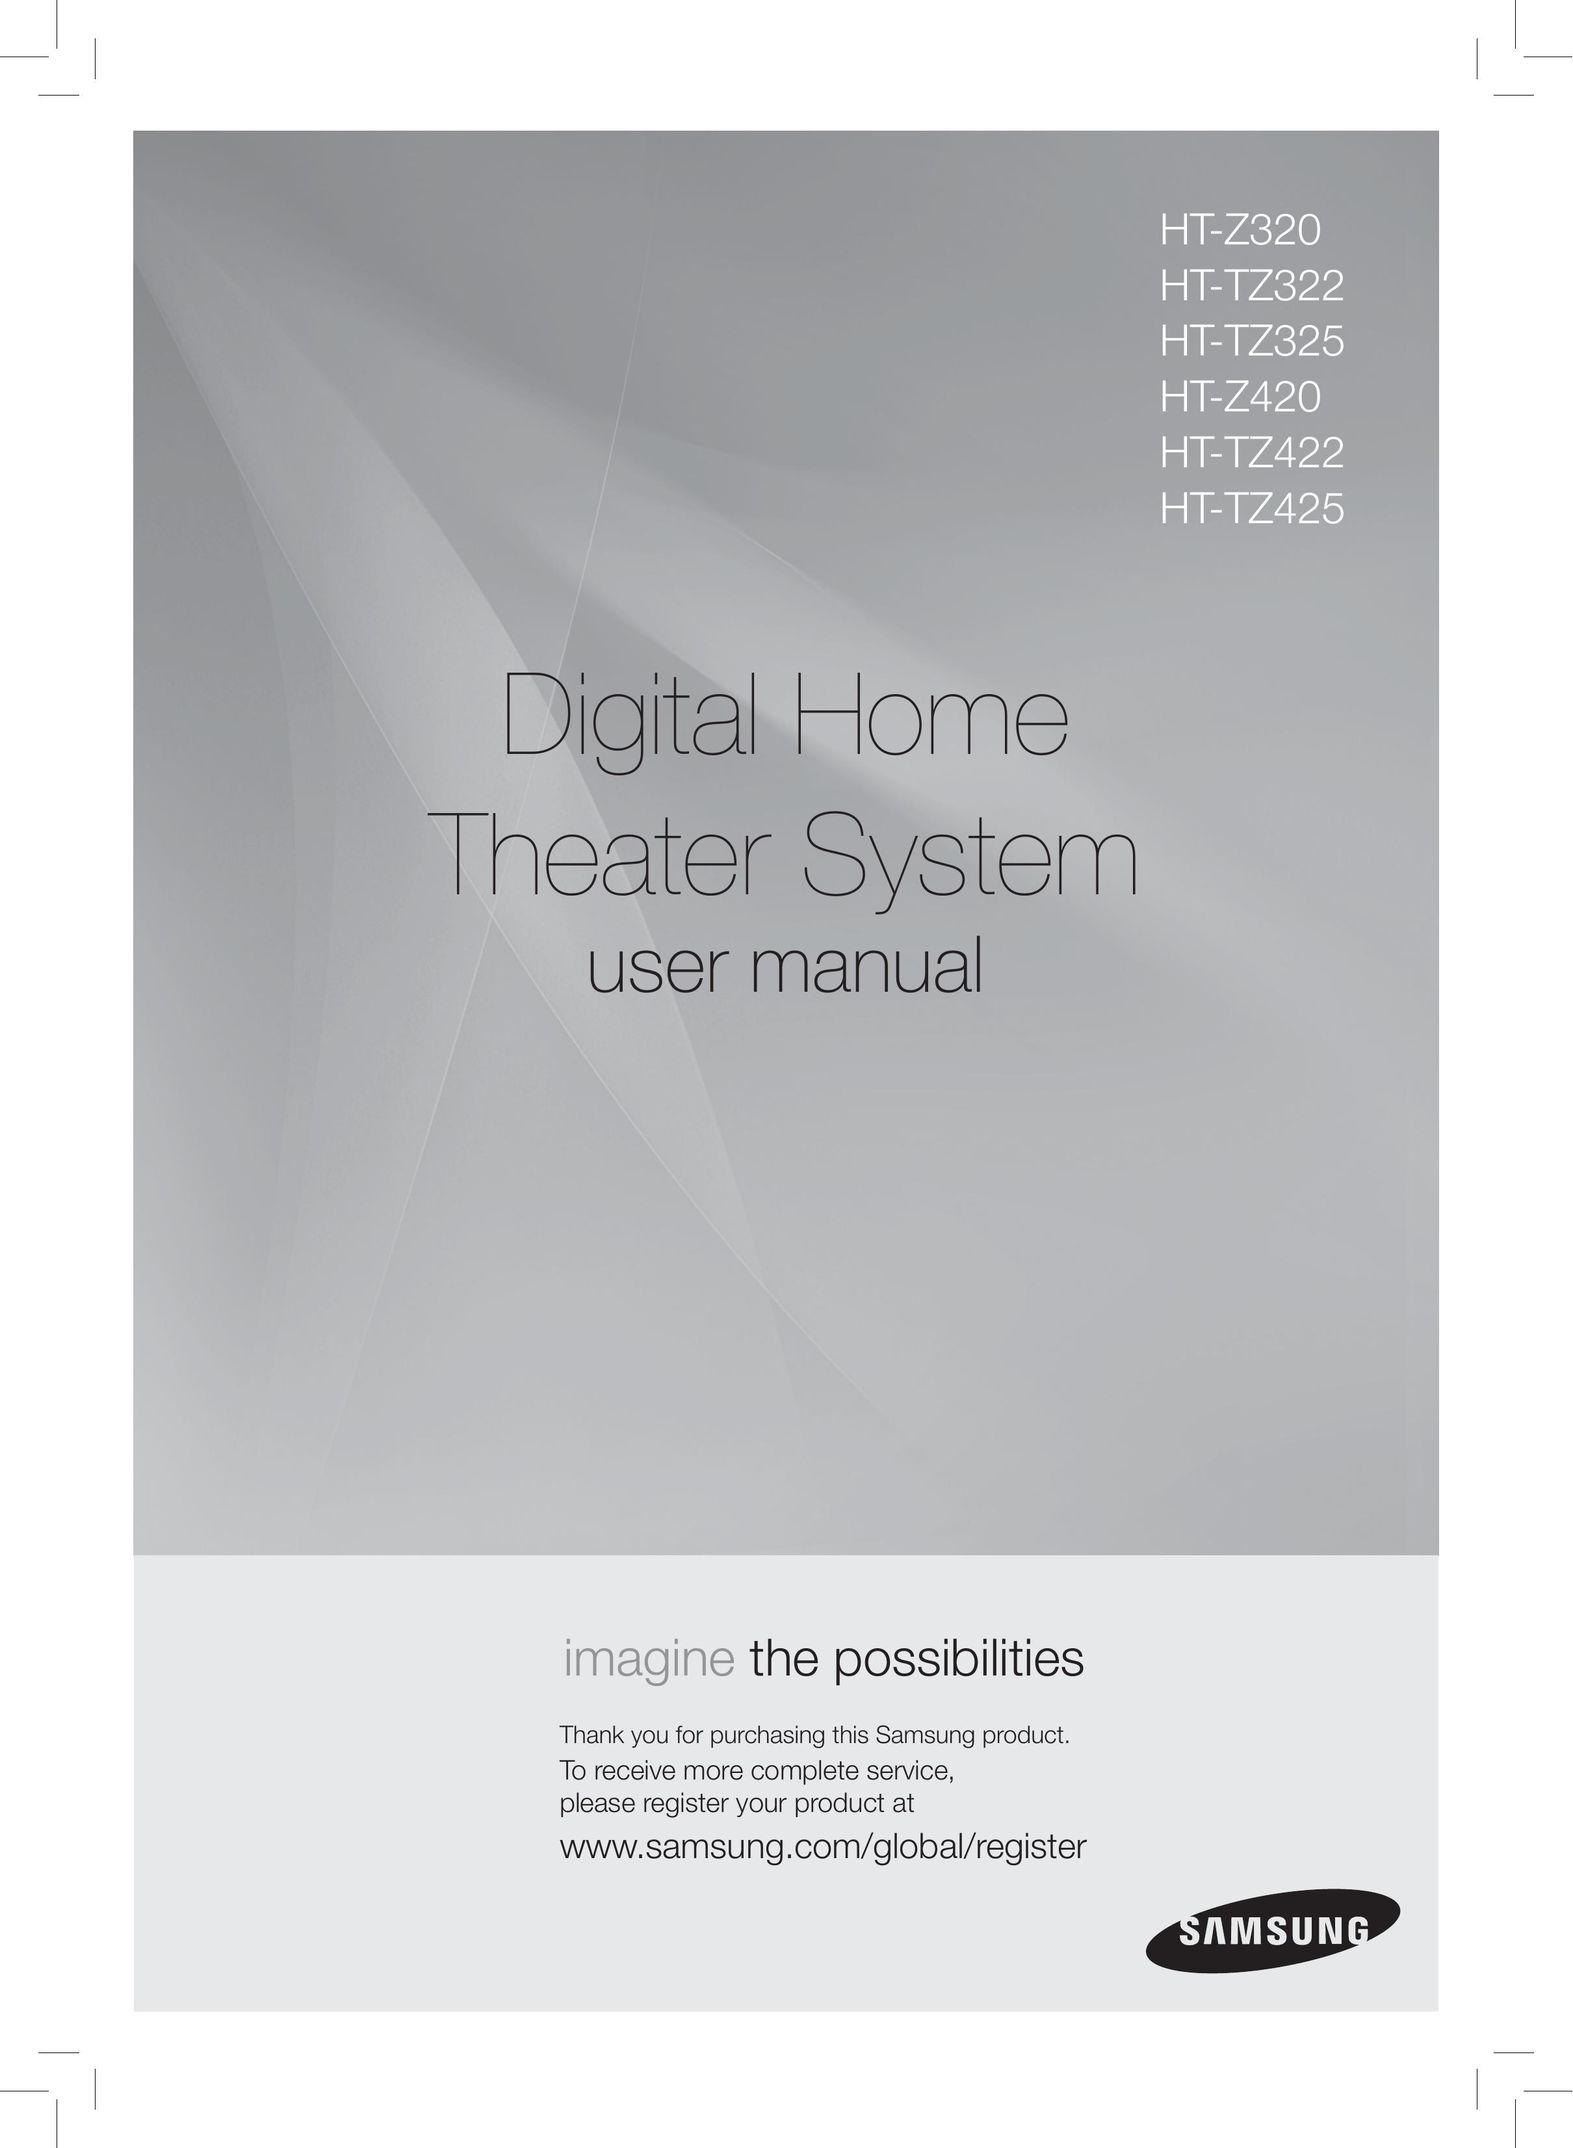 Samsung AH68-02166R Home Theater System User Manual